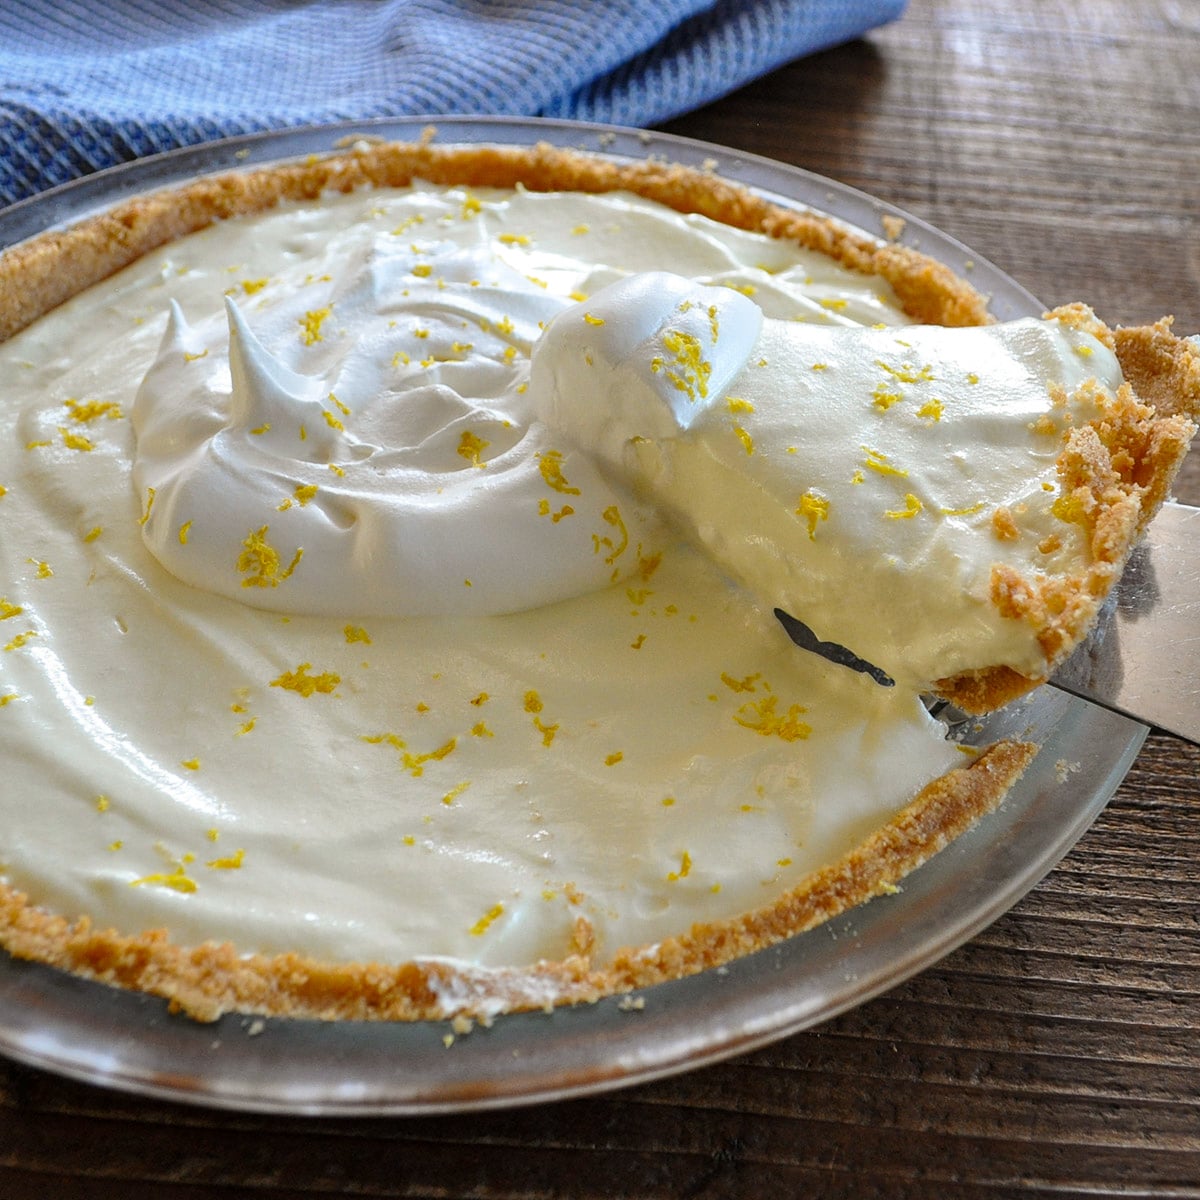 A slice of lemon pie being lifted from a whole lemon pie